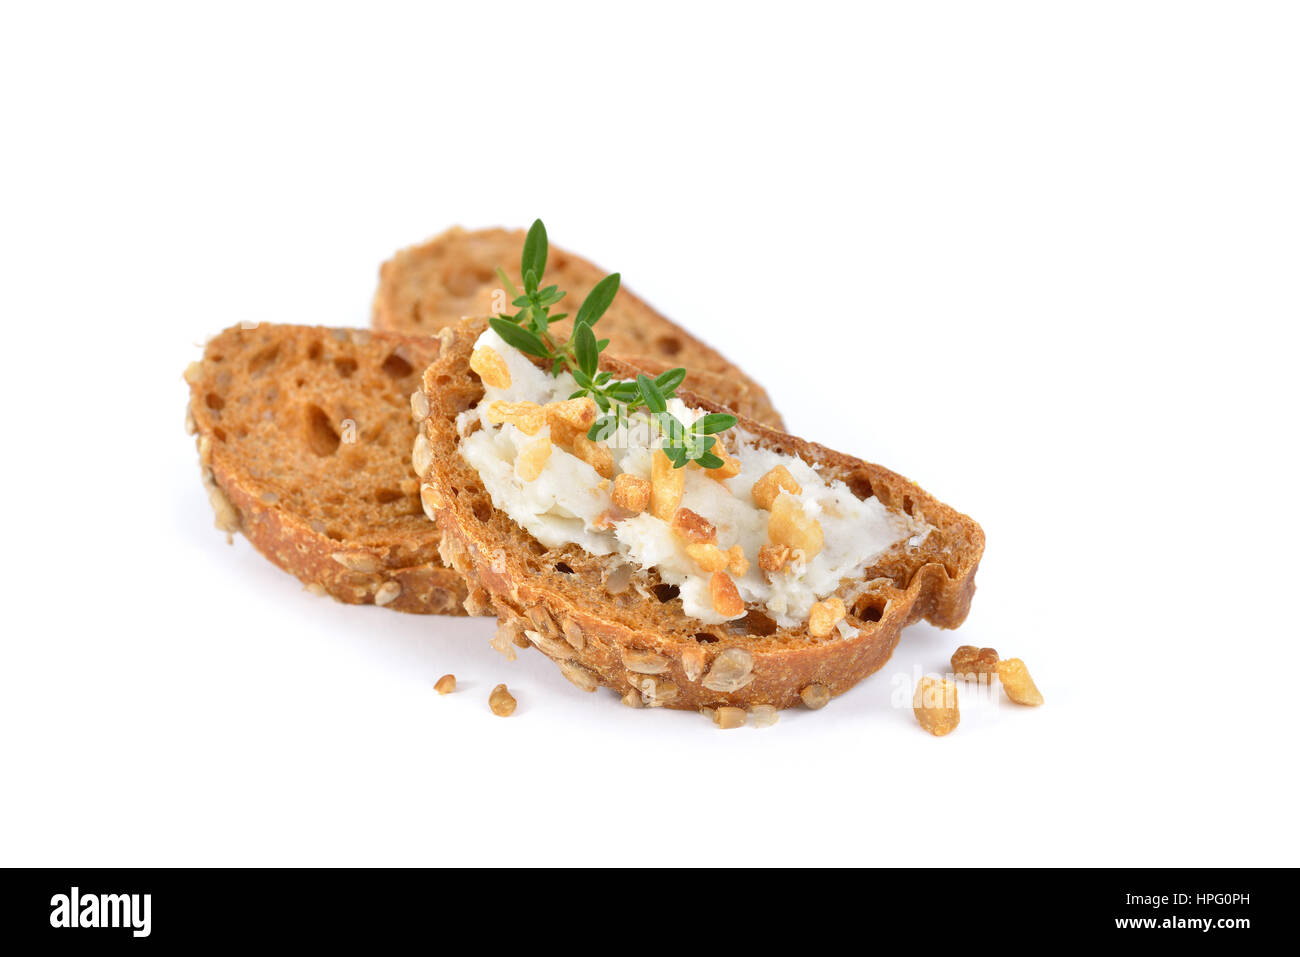 Hearty bread appetizers: Spicy German crackling lard on small rye bread slices garnished with thyme leaves Stock Photo